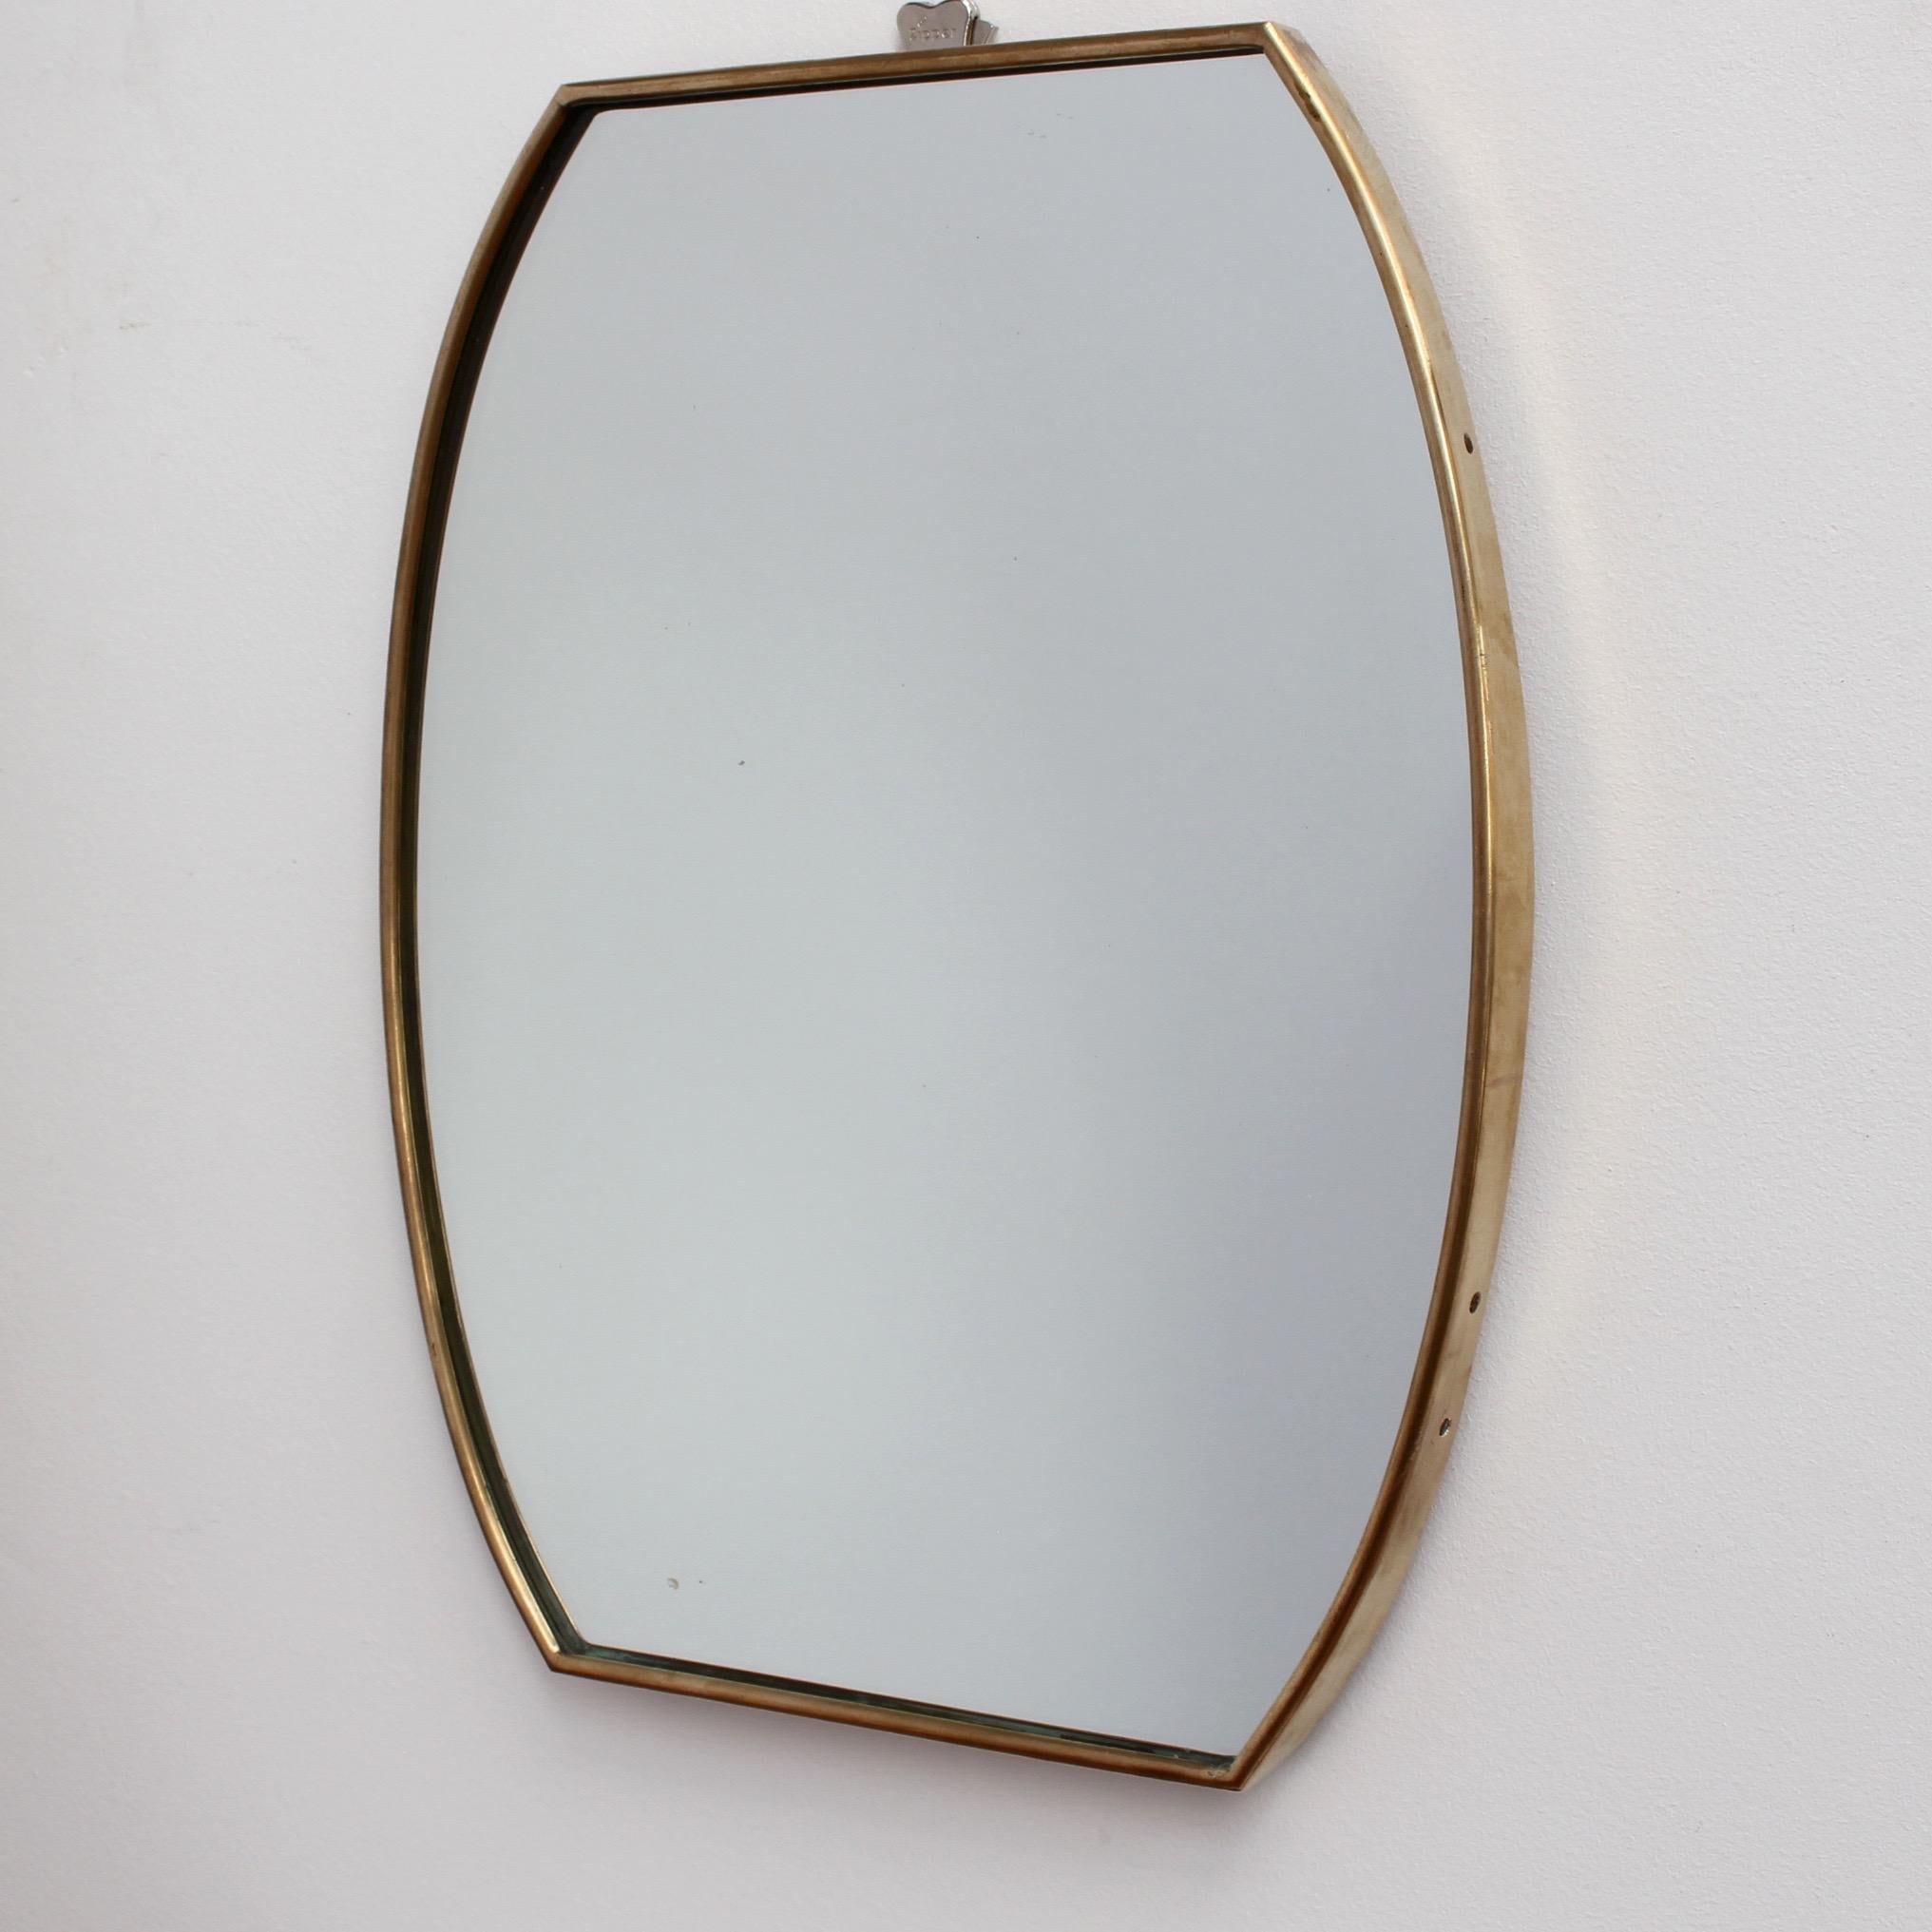 Small-scale midcentury Italian wall mirror with brass frame (circa 1950s). The mirror is barrel-shaped with sensuous curves. It is classically elegant and distinctive in a modern Gio Ponti style. This mirror is in good vintage condition. There is